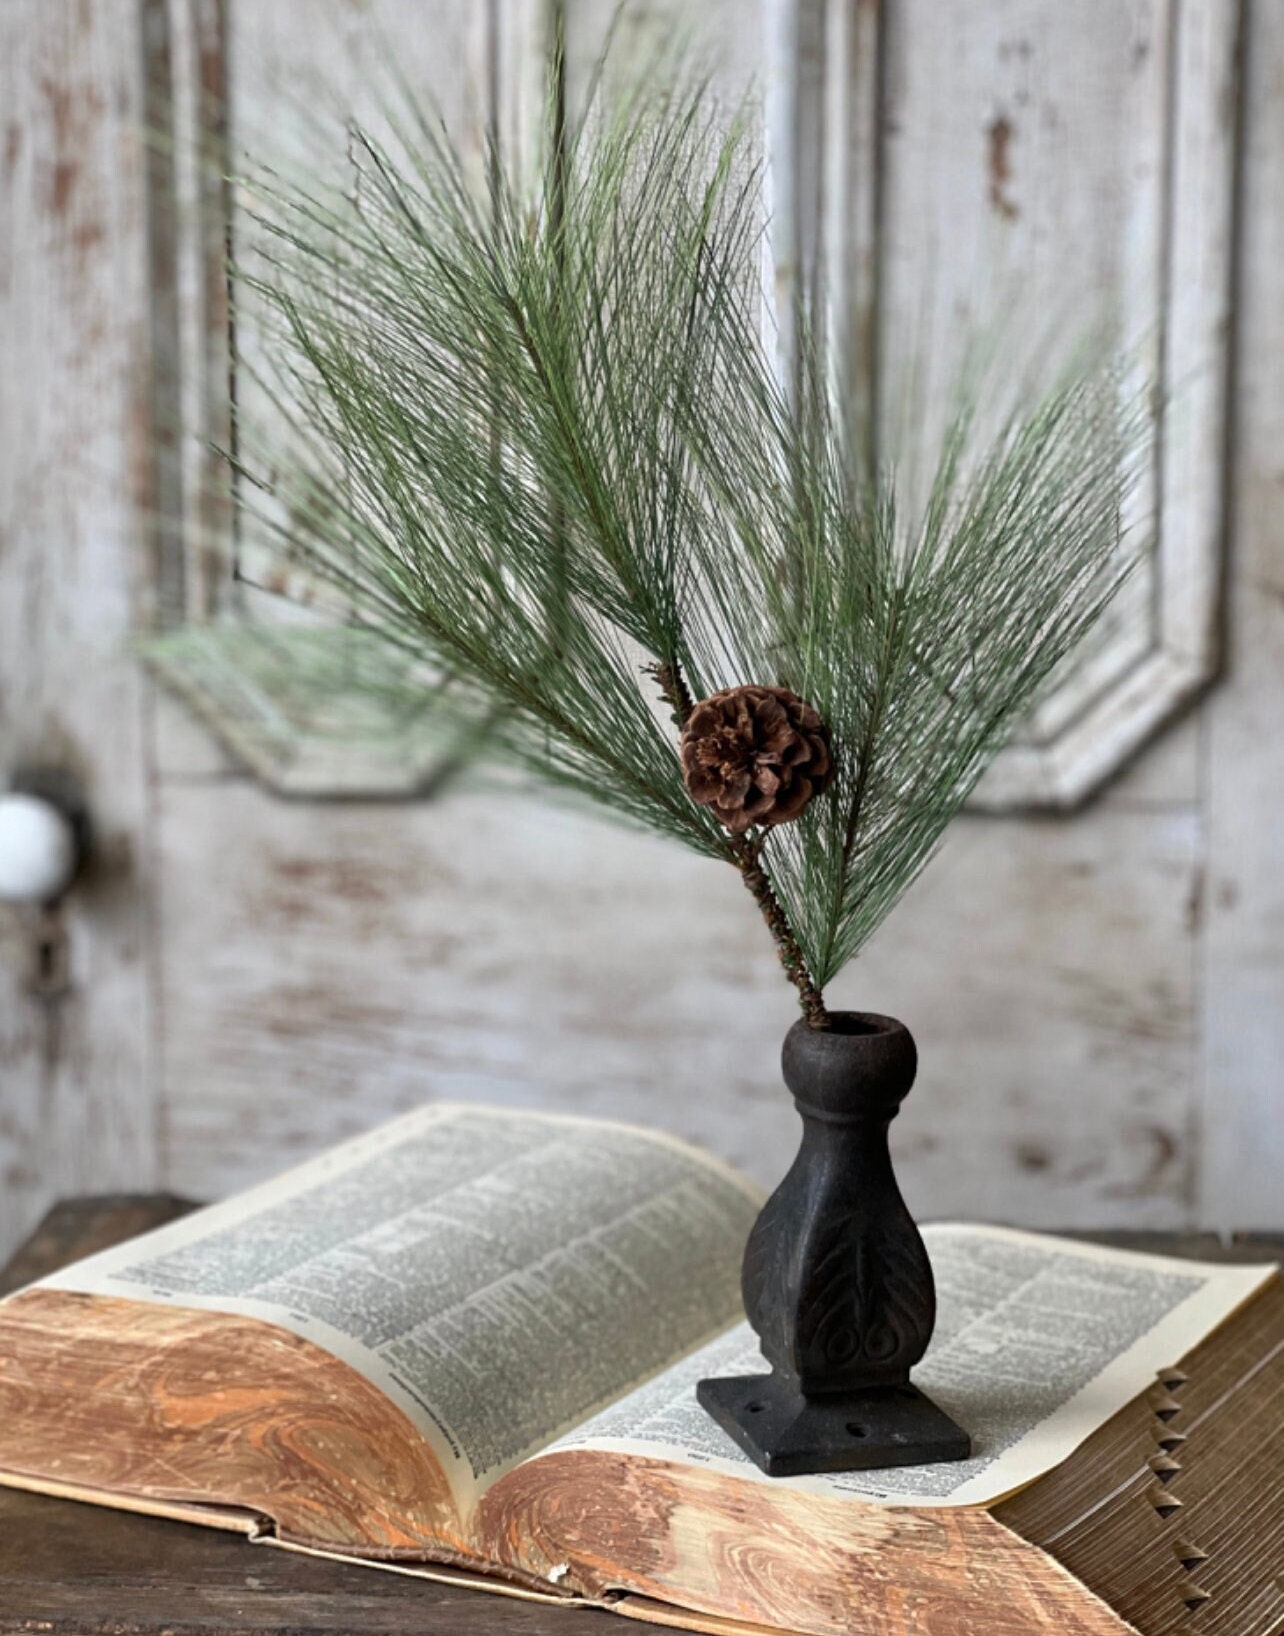 12 Long Needle Pine Half Sphere With Cones! Perfect For Christmas